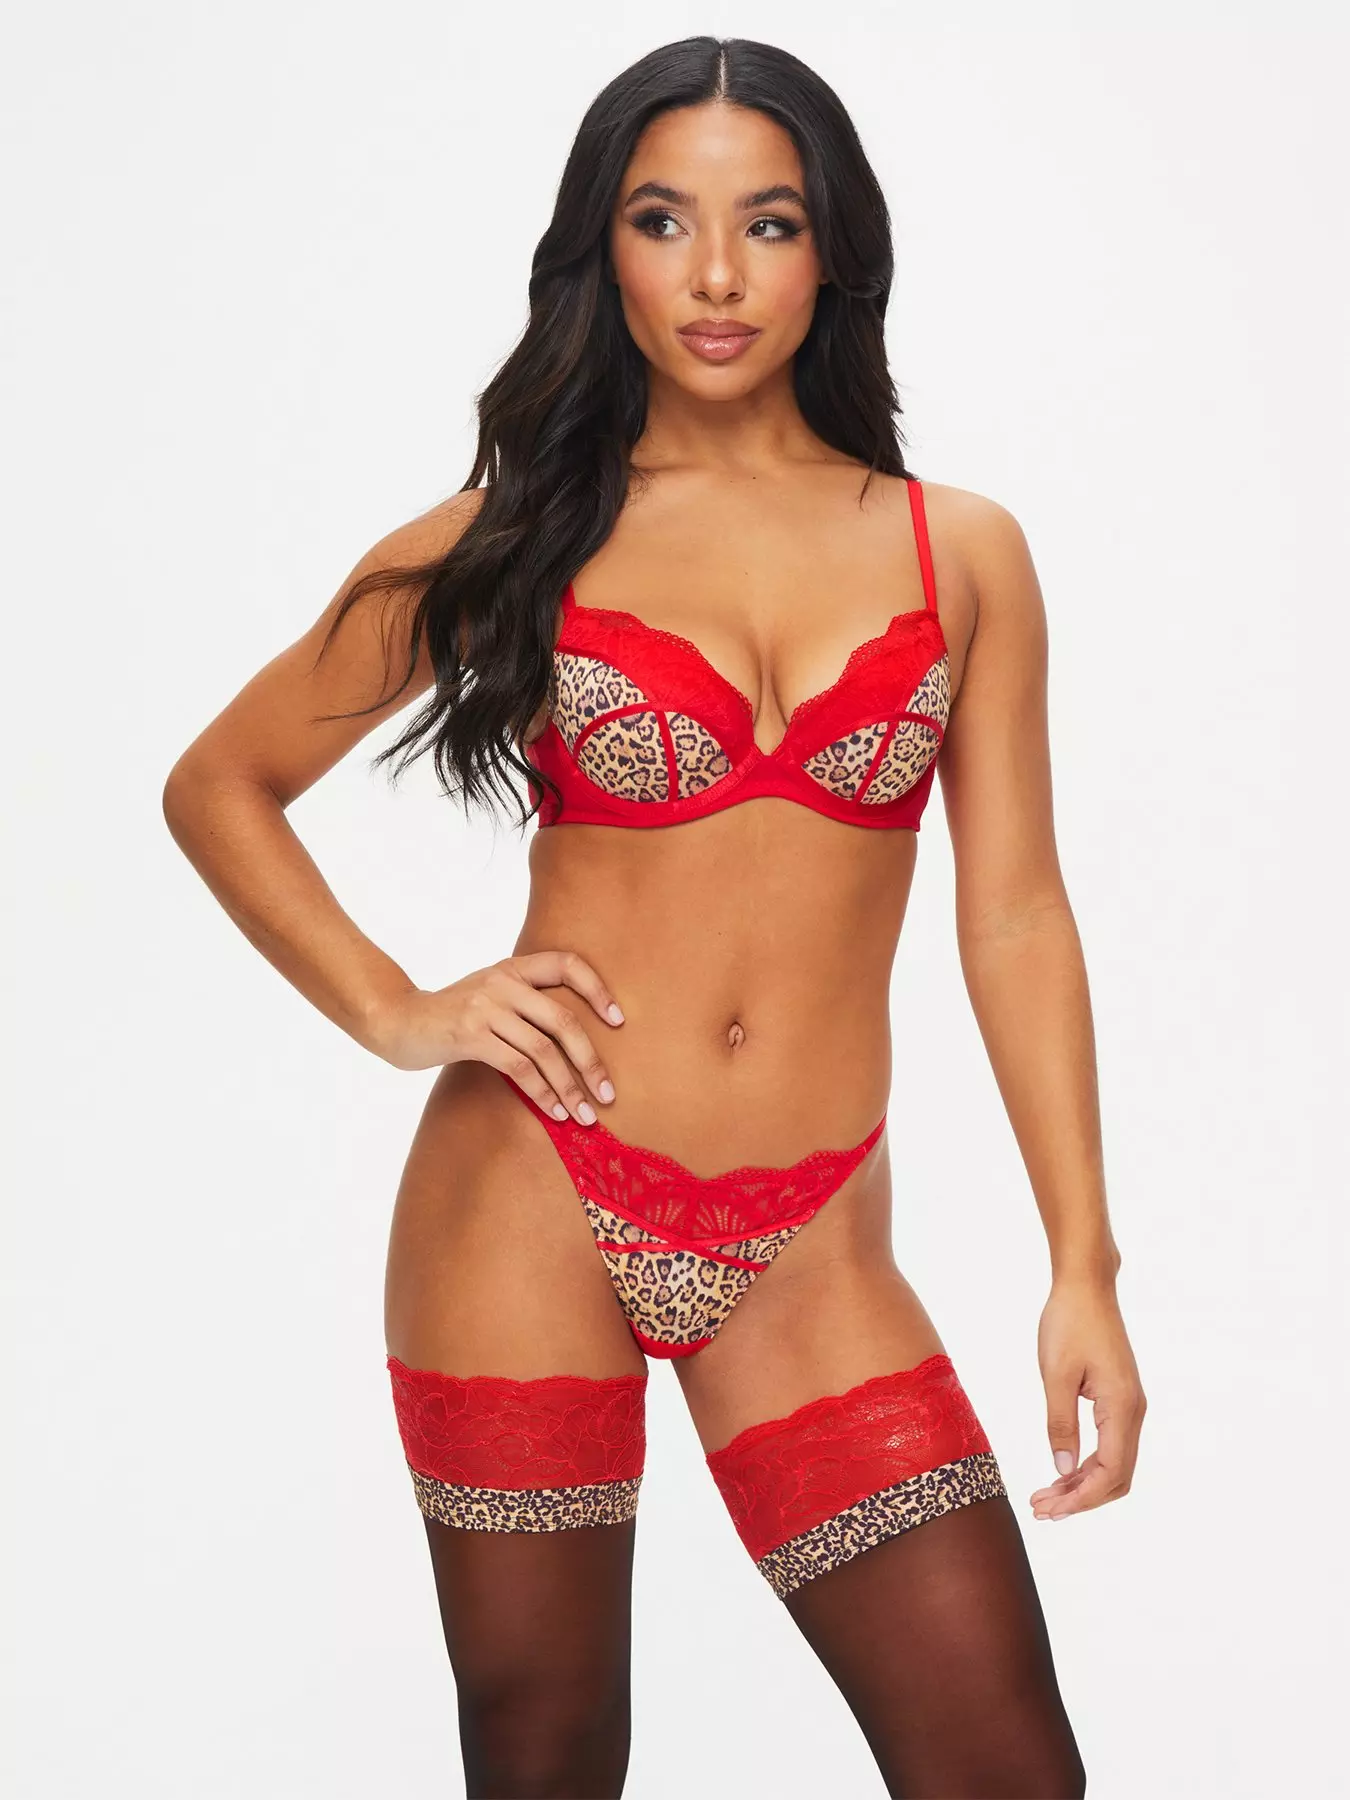 Ann Summers Erotic / Sexy Lingerie LAYA V-STRAP BODY Valentine's Day